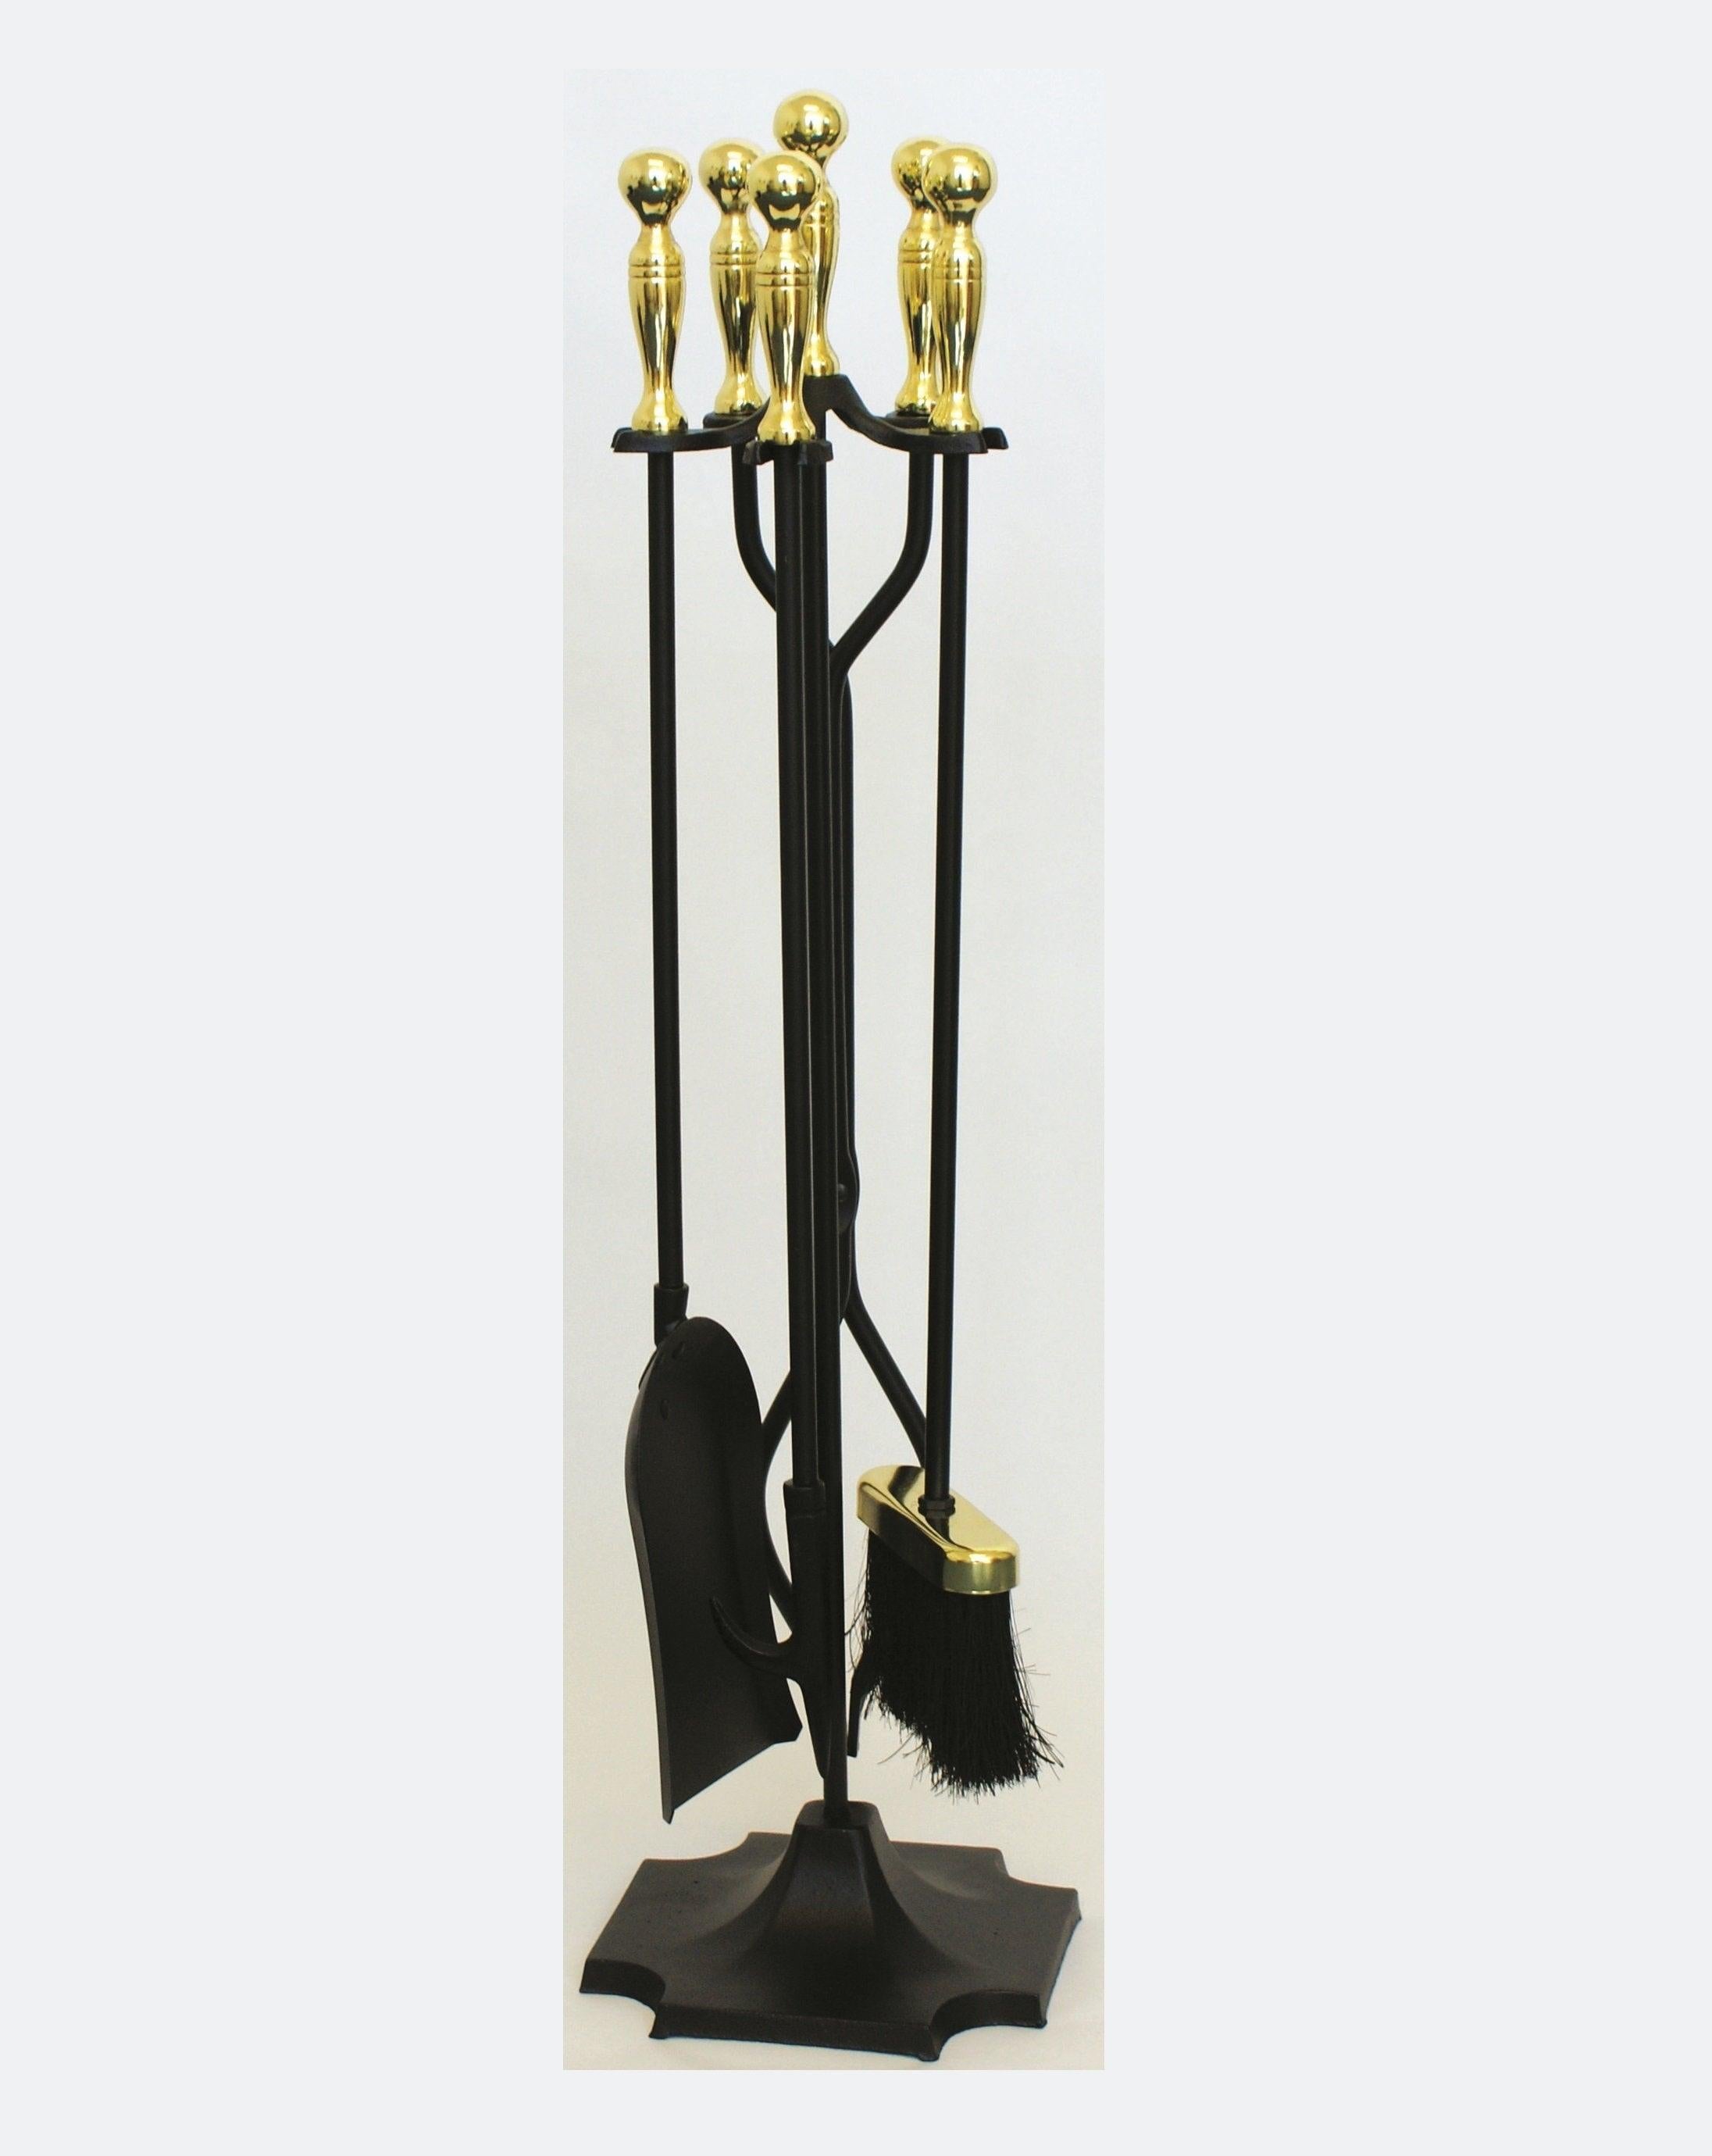 FireUp Fire Tools - Mid Range Black and Brass Plated 4 Piece Set, Heater Accessories, S&D Berg